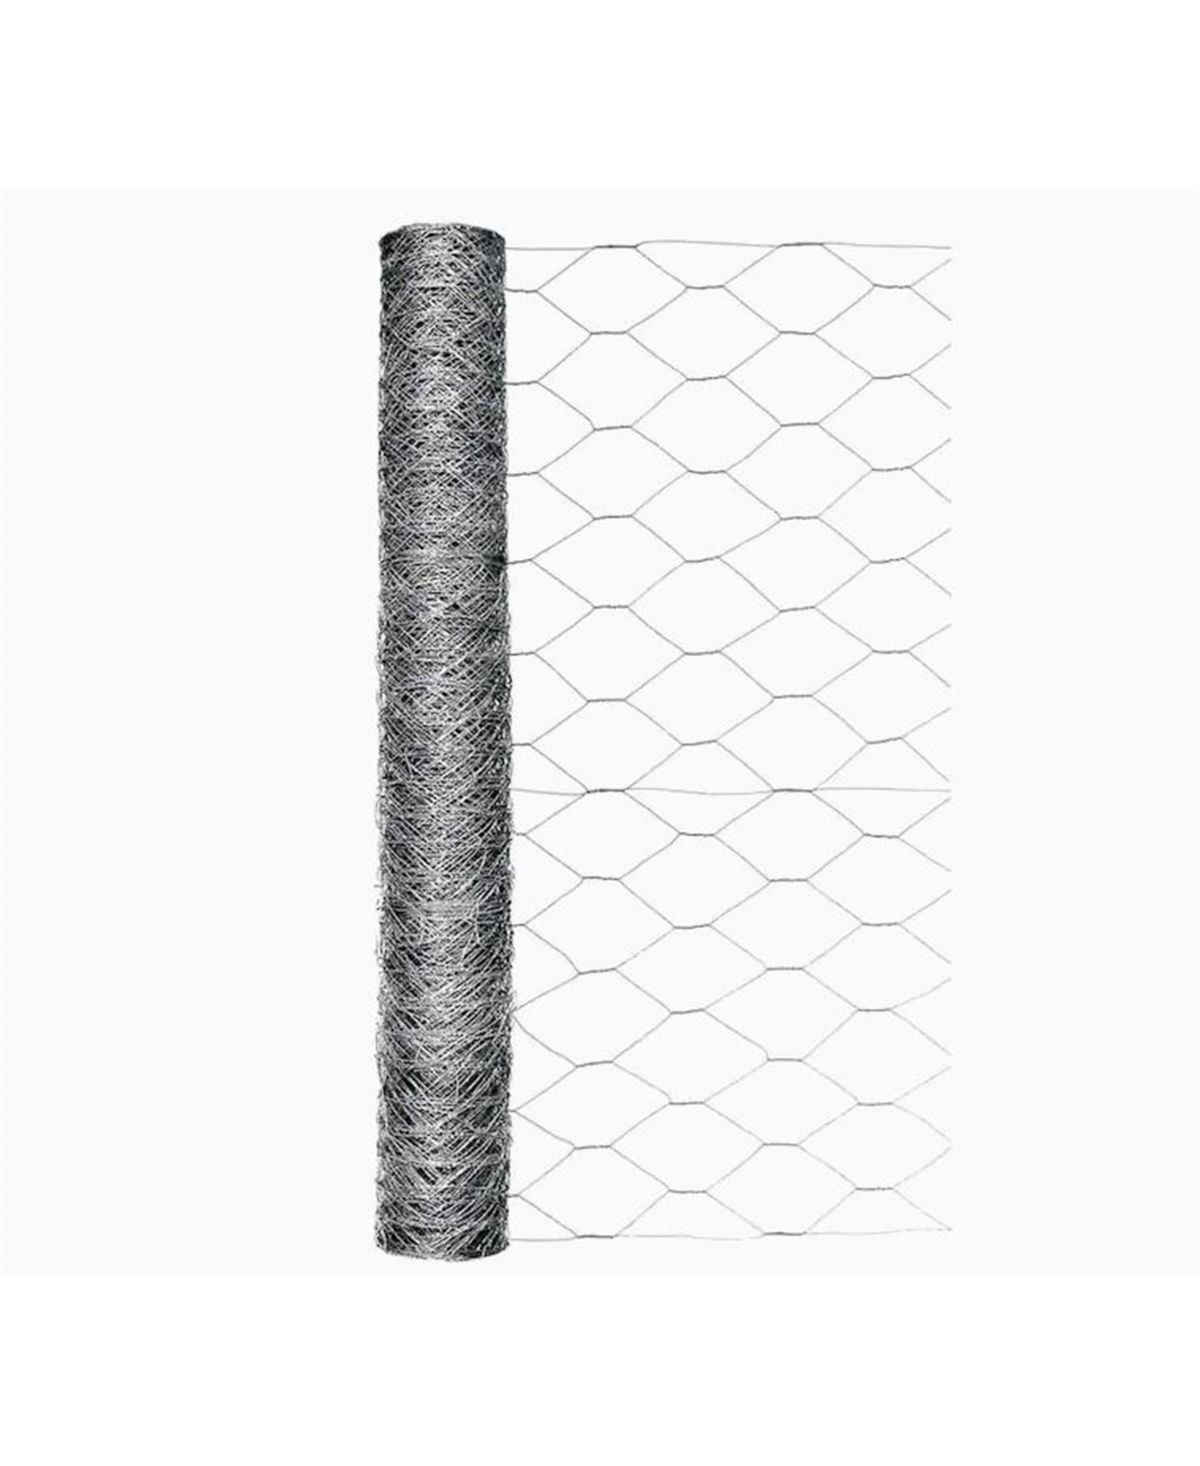 Galvanized Steel Hex Poultry Rolled Netting, 2 ft x 50 ft - Gray